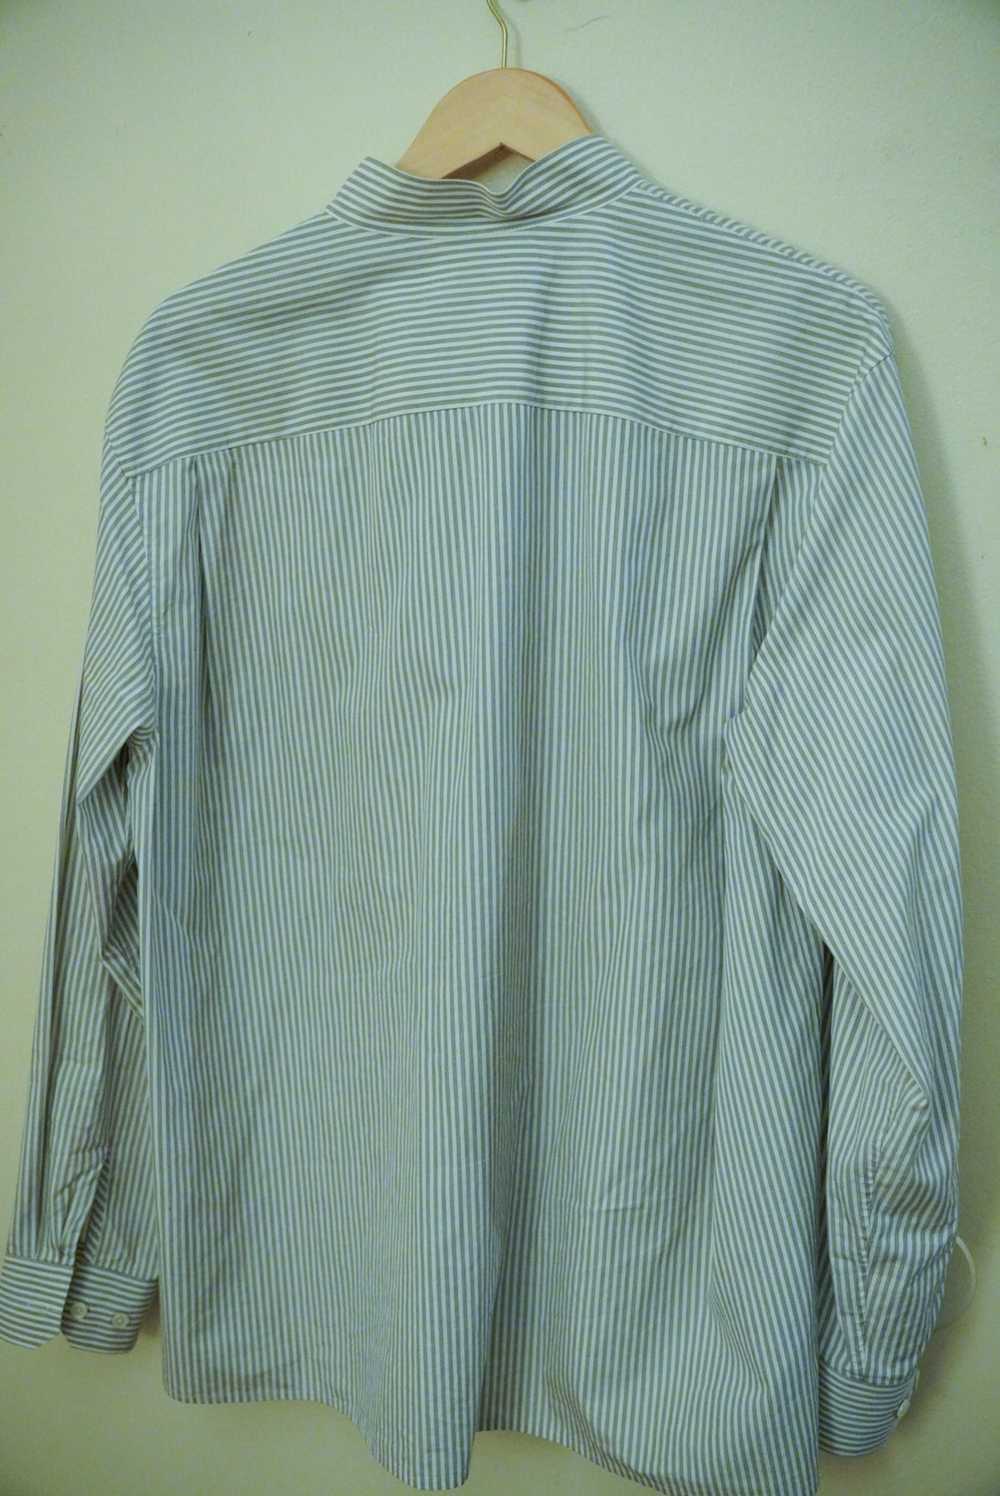 Lemaire Twisted Officer Collar Shirt - image 4